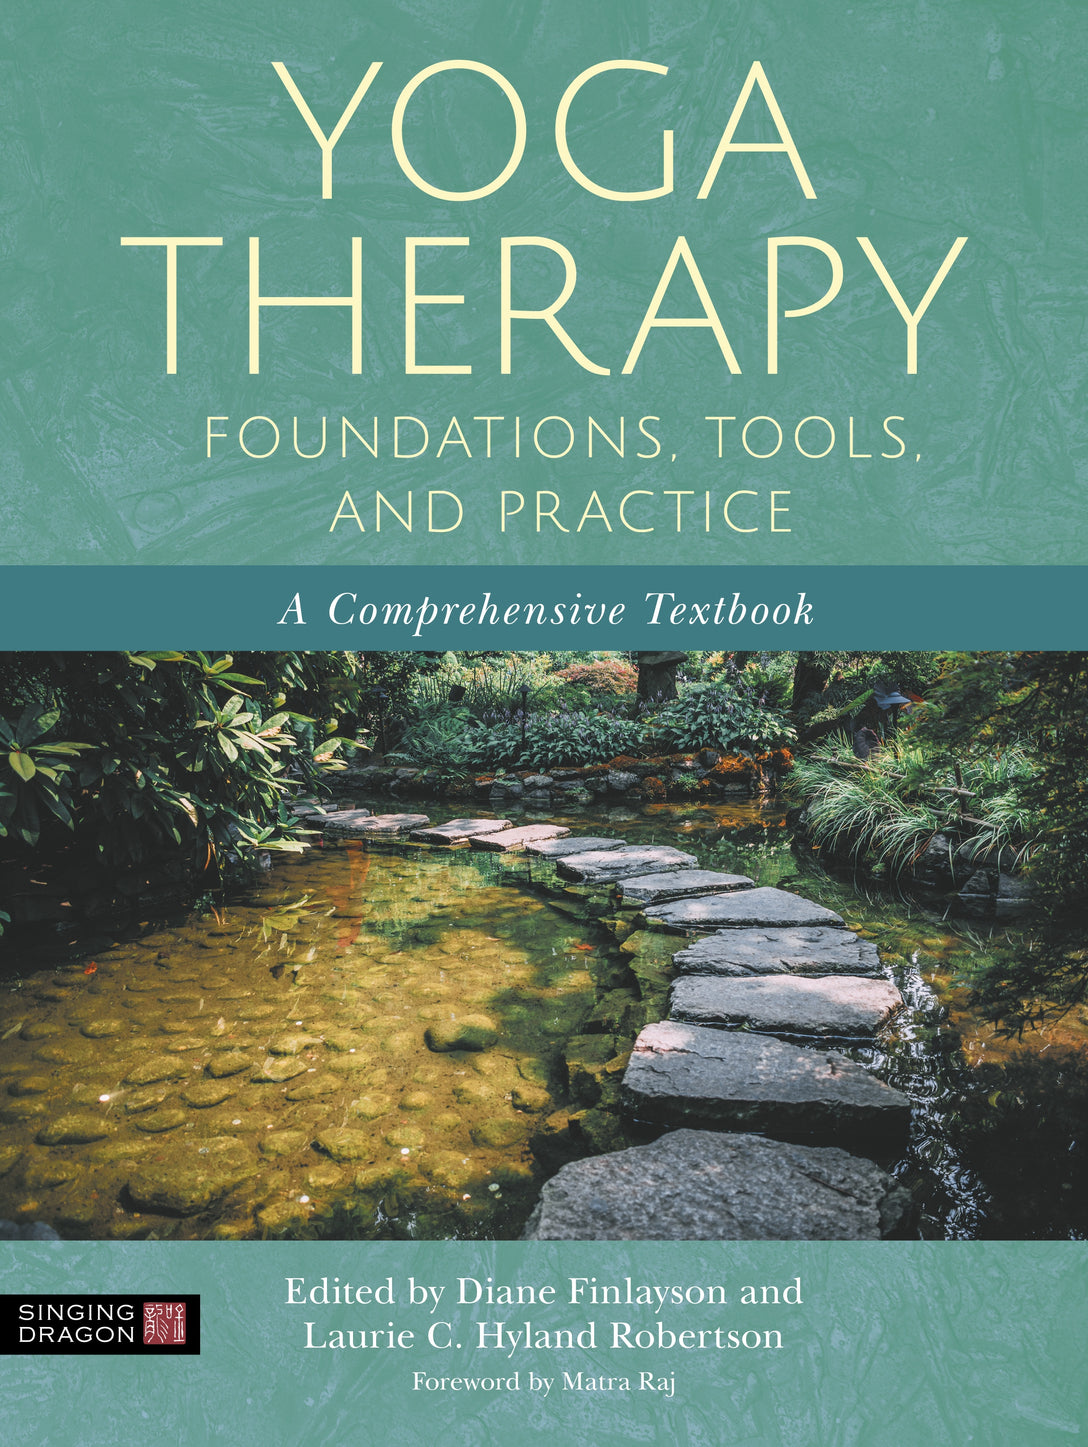 Yoga Therapy Foundations, Tools, and Practice by No Author Listed, Laurie Hyland Robertson, Diane Finlayson, Matra Raj